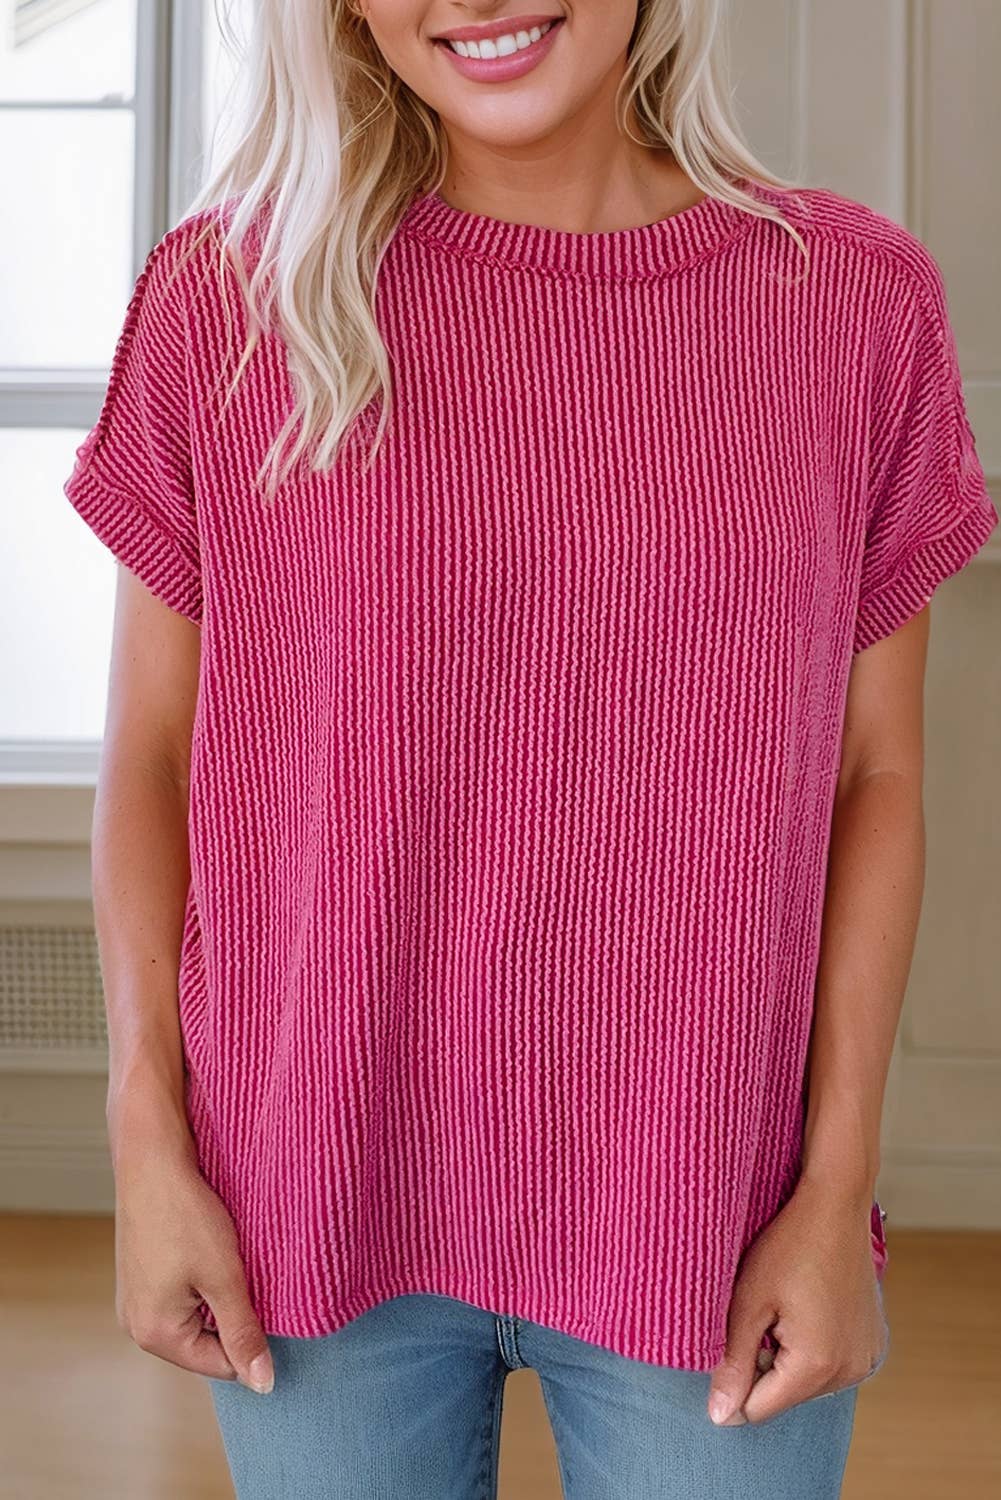 Textured Knit Exposed Stitching T-shirt